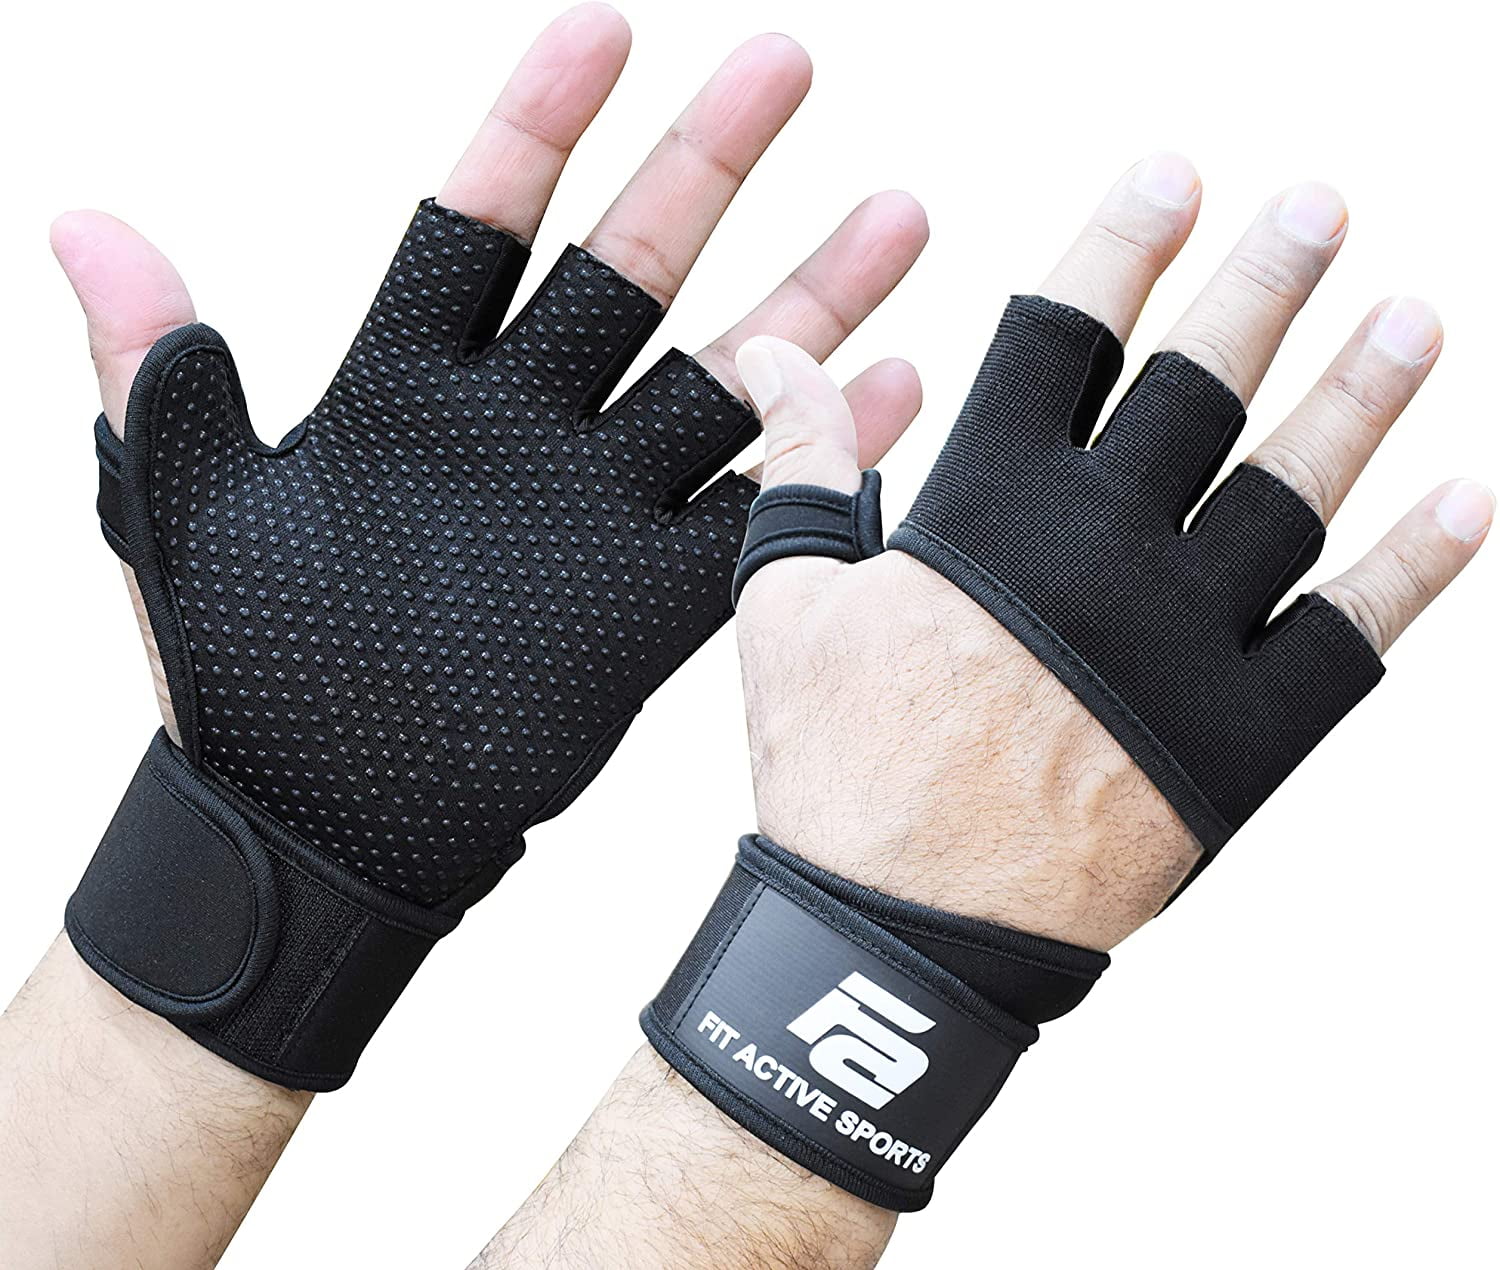 Grip Pad Gym Gel padded Gloves strap wrist Weight Lifting Body Building Workout 